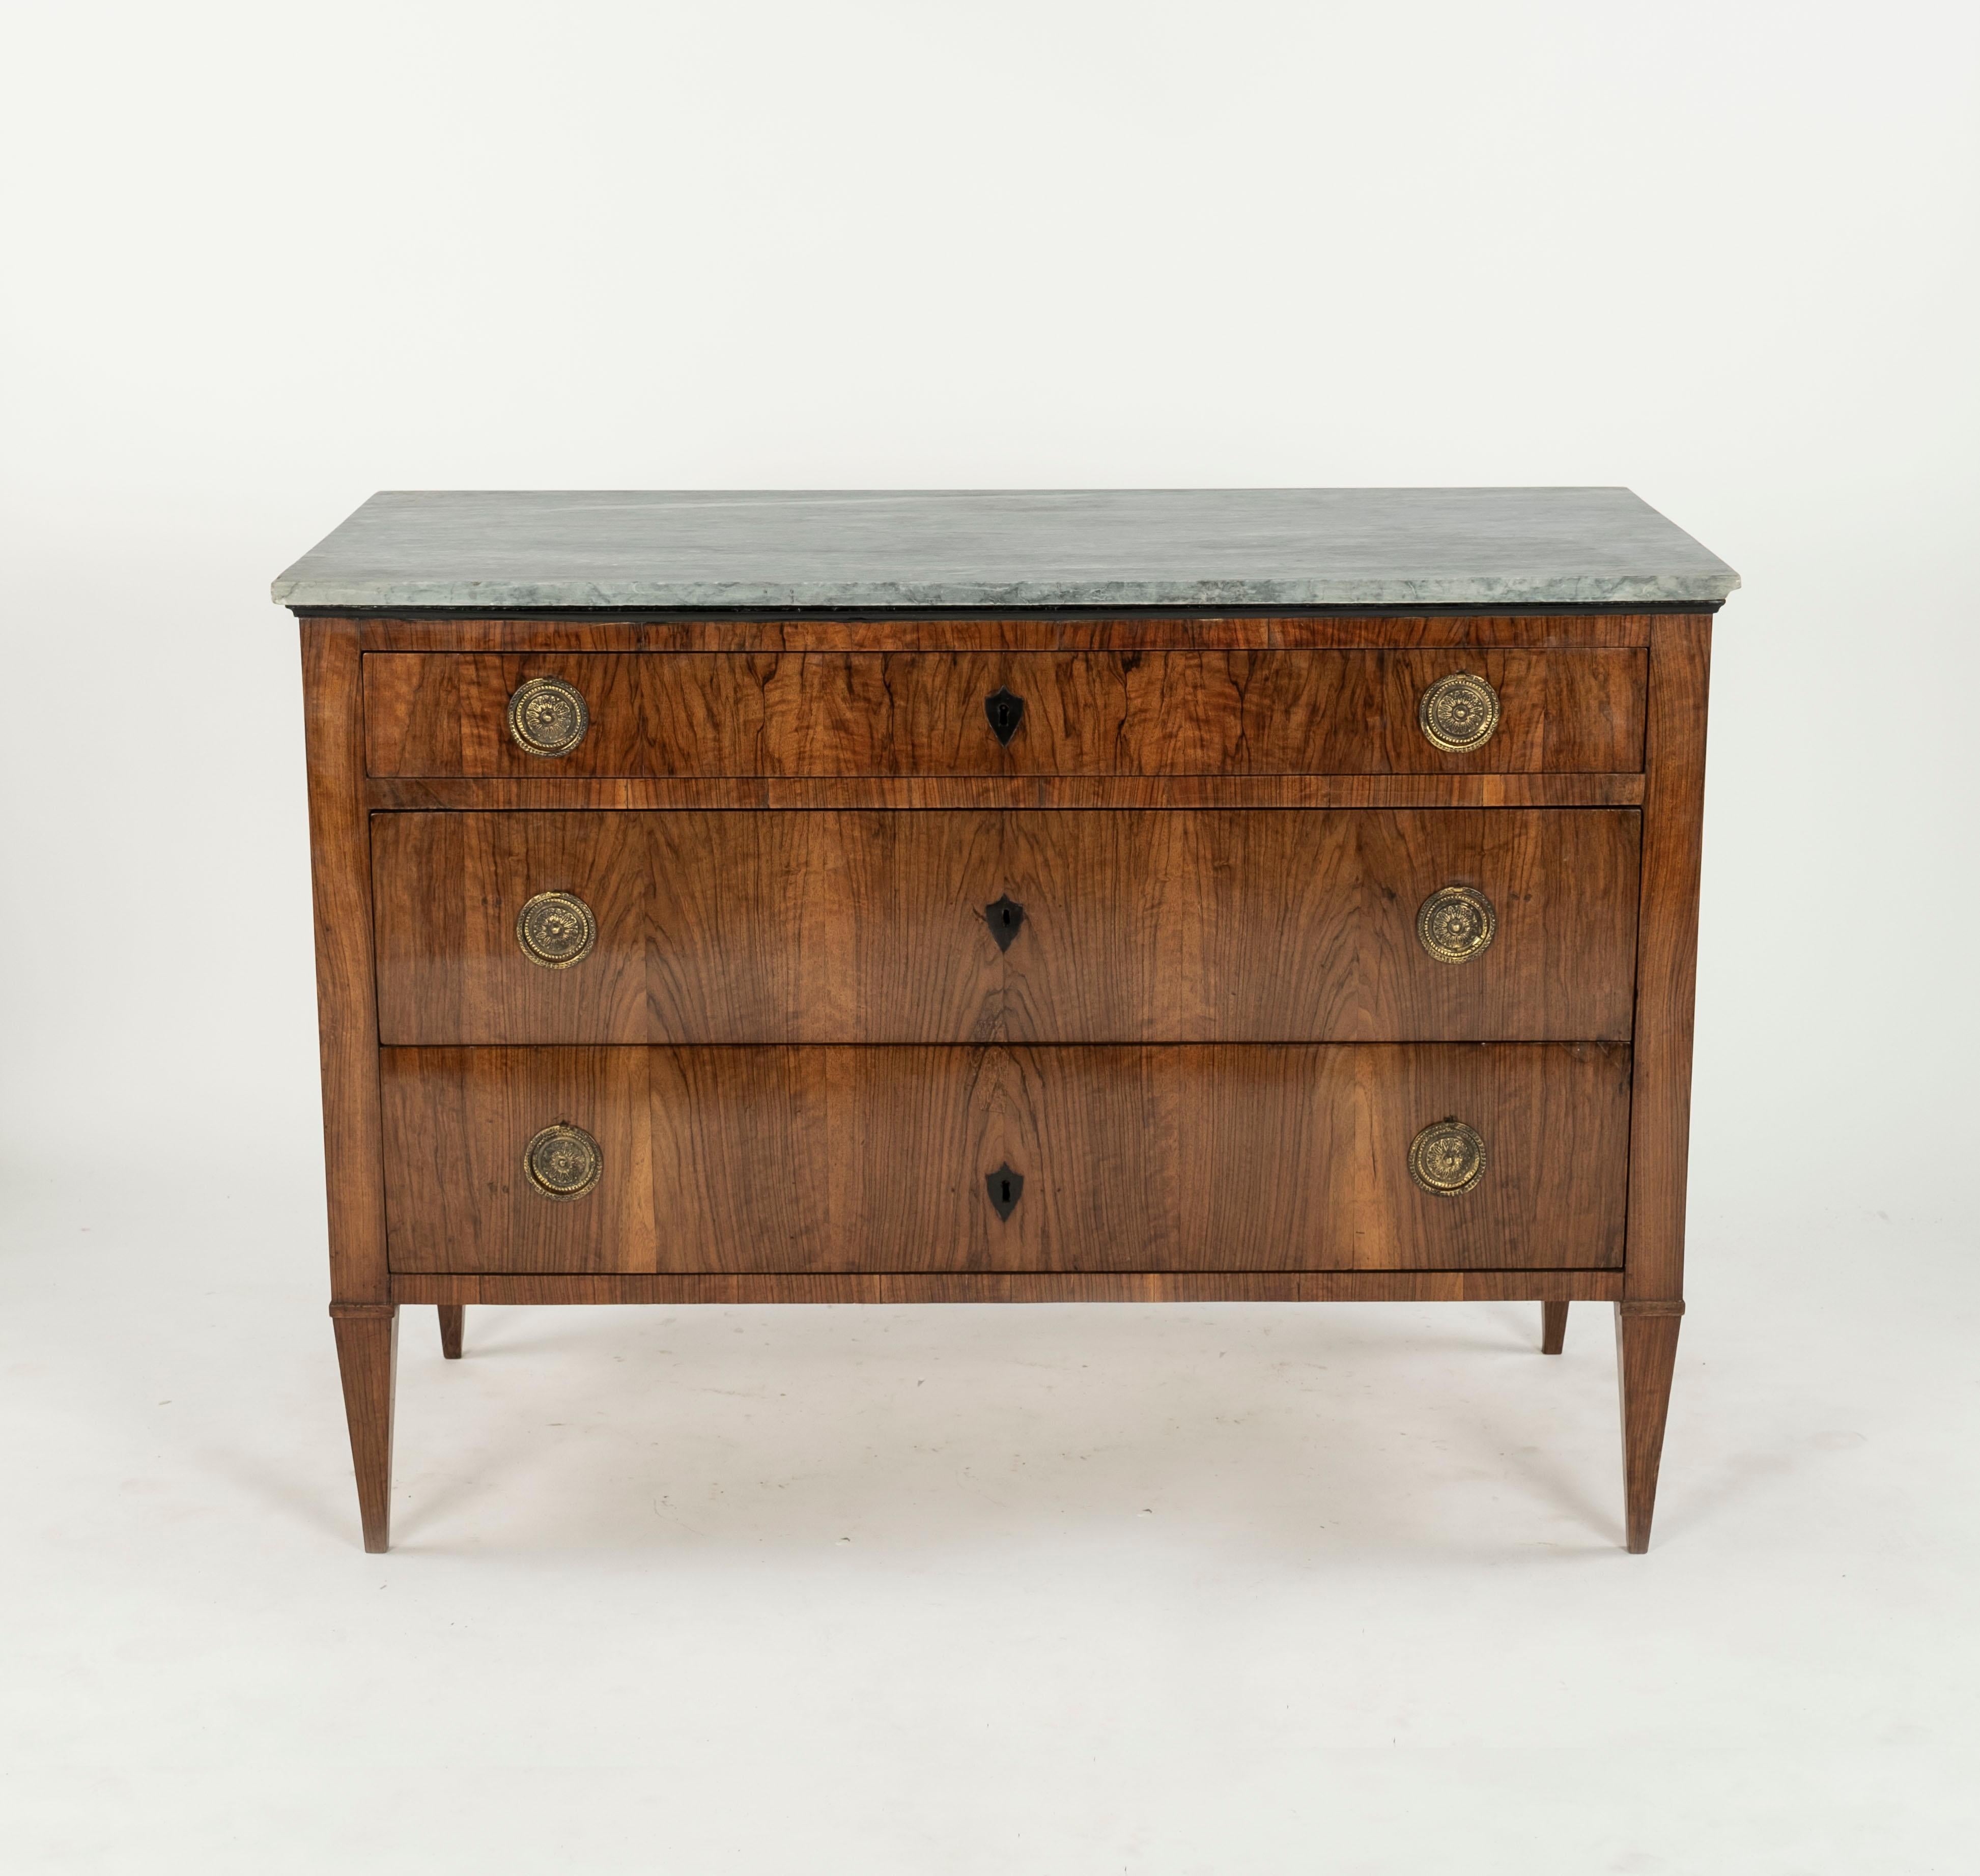 An exceptionally stylish pair of early 19th Century three drawer chest of drawers with good use of matching walnut to fronts. Having original marbles on top. The drawers having ebonised escutcheons and brass drop pull handles. Standing on square